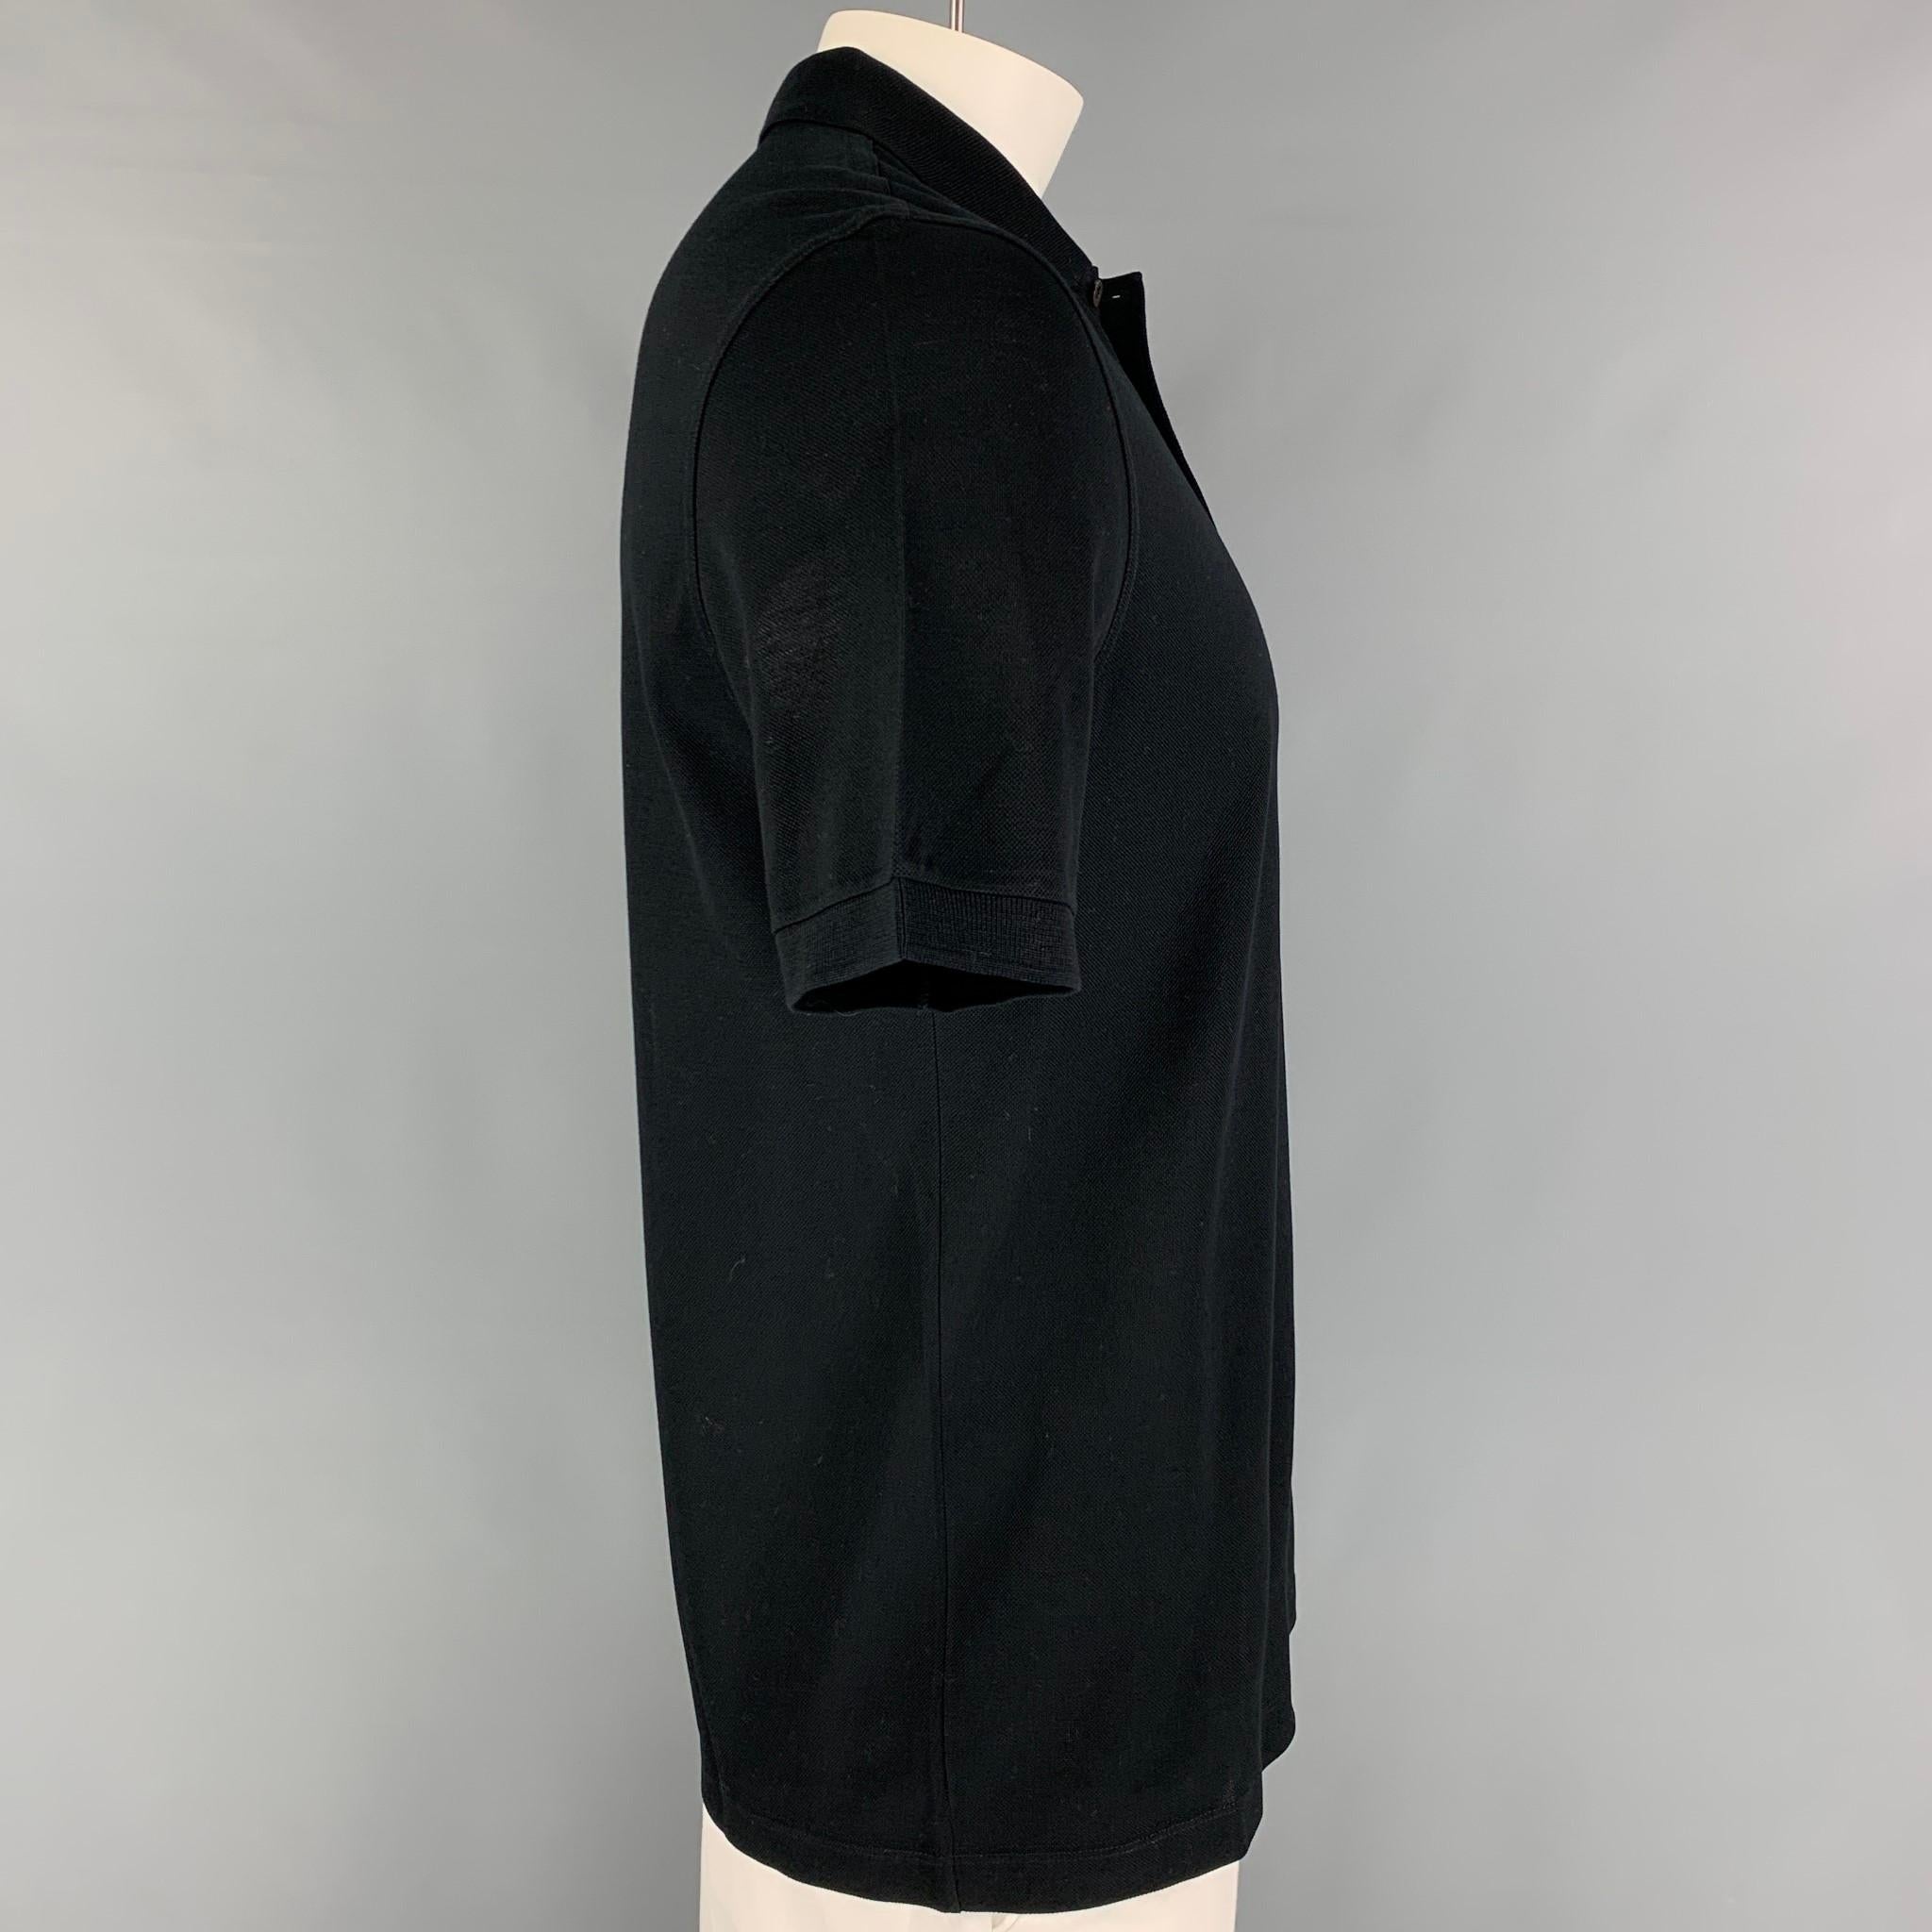 LOUIS VUITTON polo comes in a black cotton featuring a embroidered logo, spread collar, and a half buttoned closure. Made in Italy. 

Excellent Pre-Owned Condition.
Marked: L

Measurements:

Shoulder: 18 in.
Chest: 40 in.
Sleeve: 10 in.
Length: 28